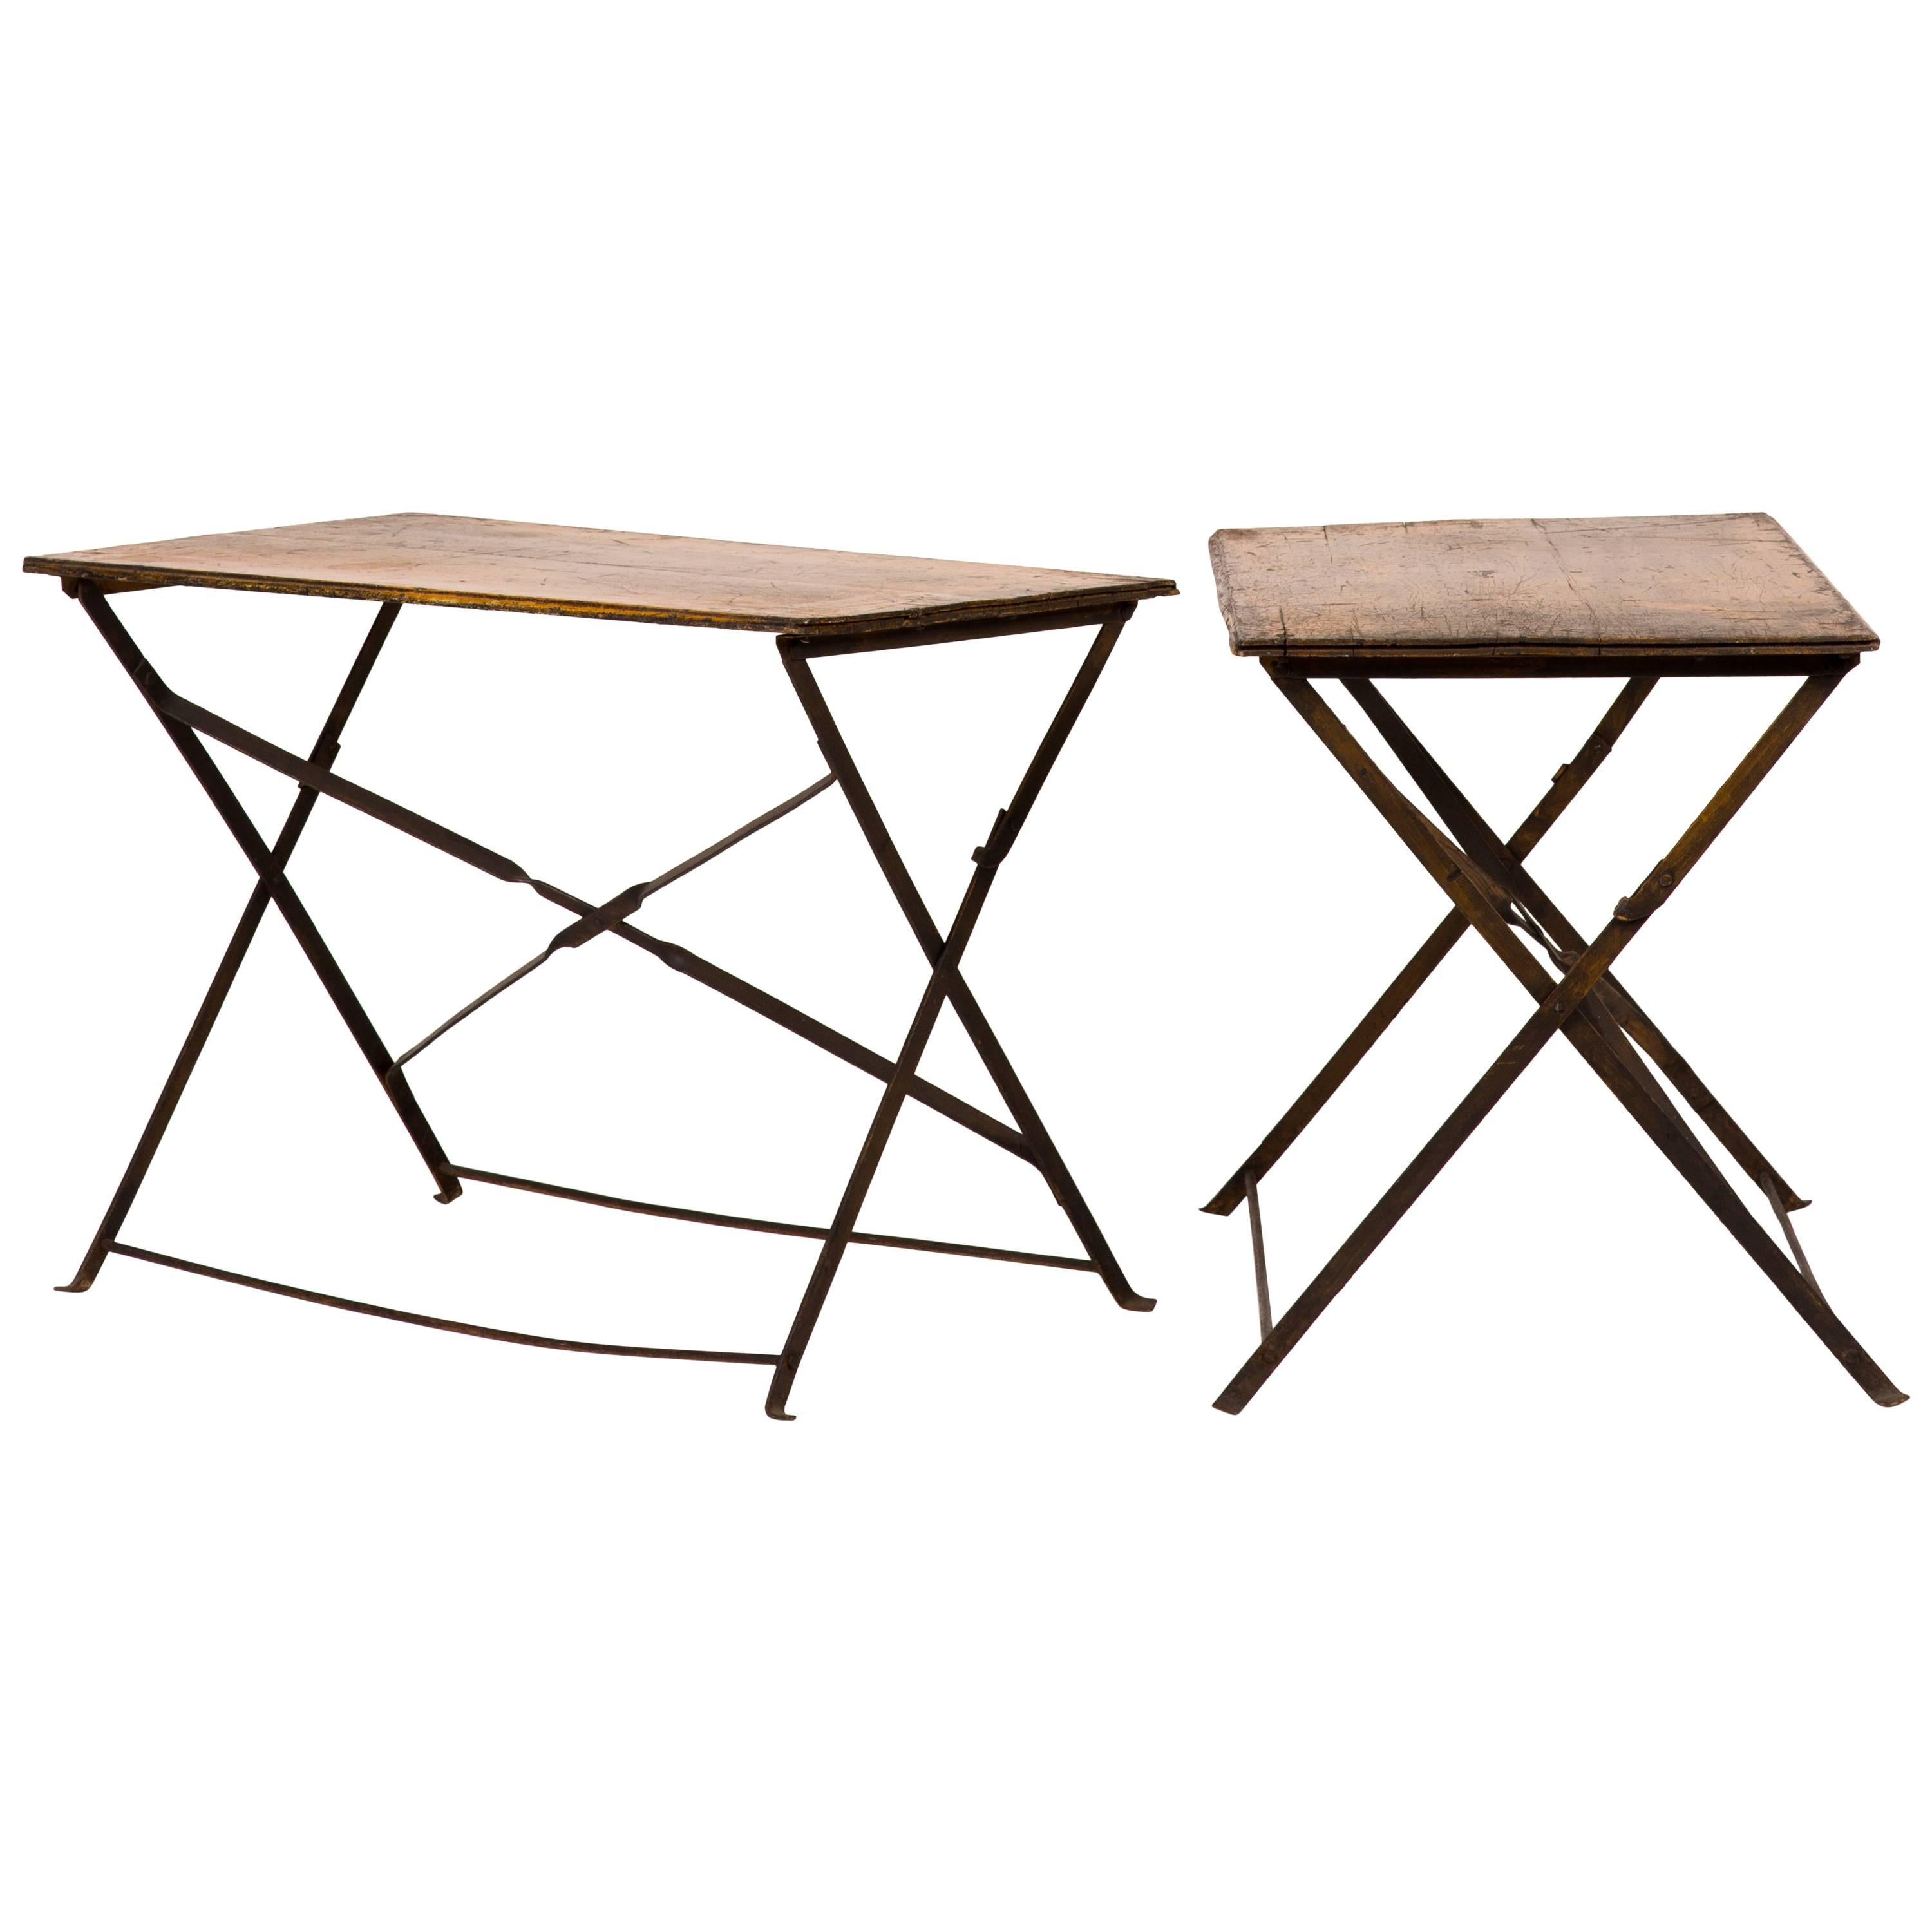 Pair of Early 20th Century British Campaign Wood and Iron Folding Tables 